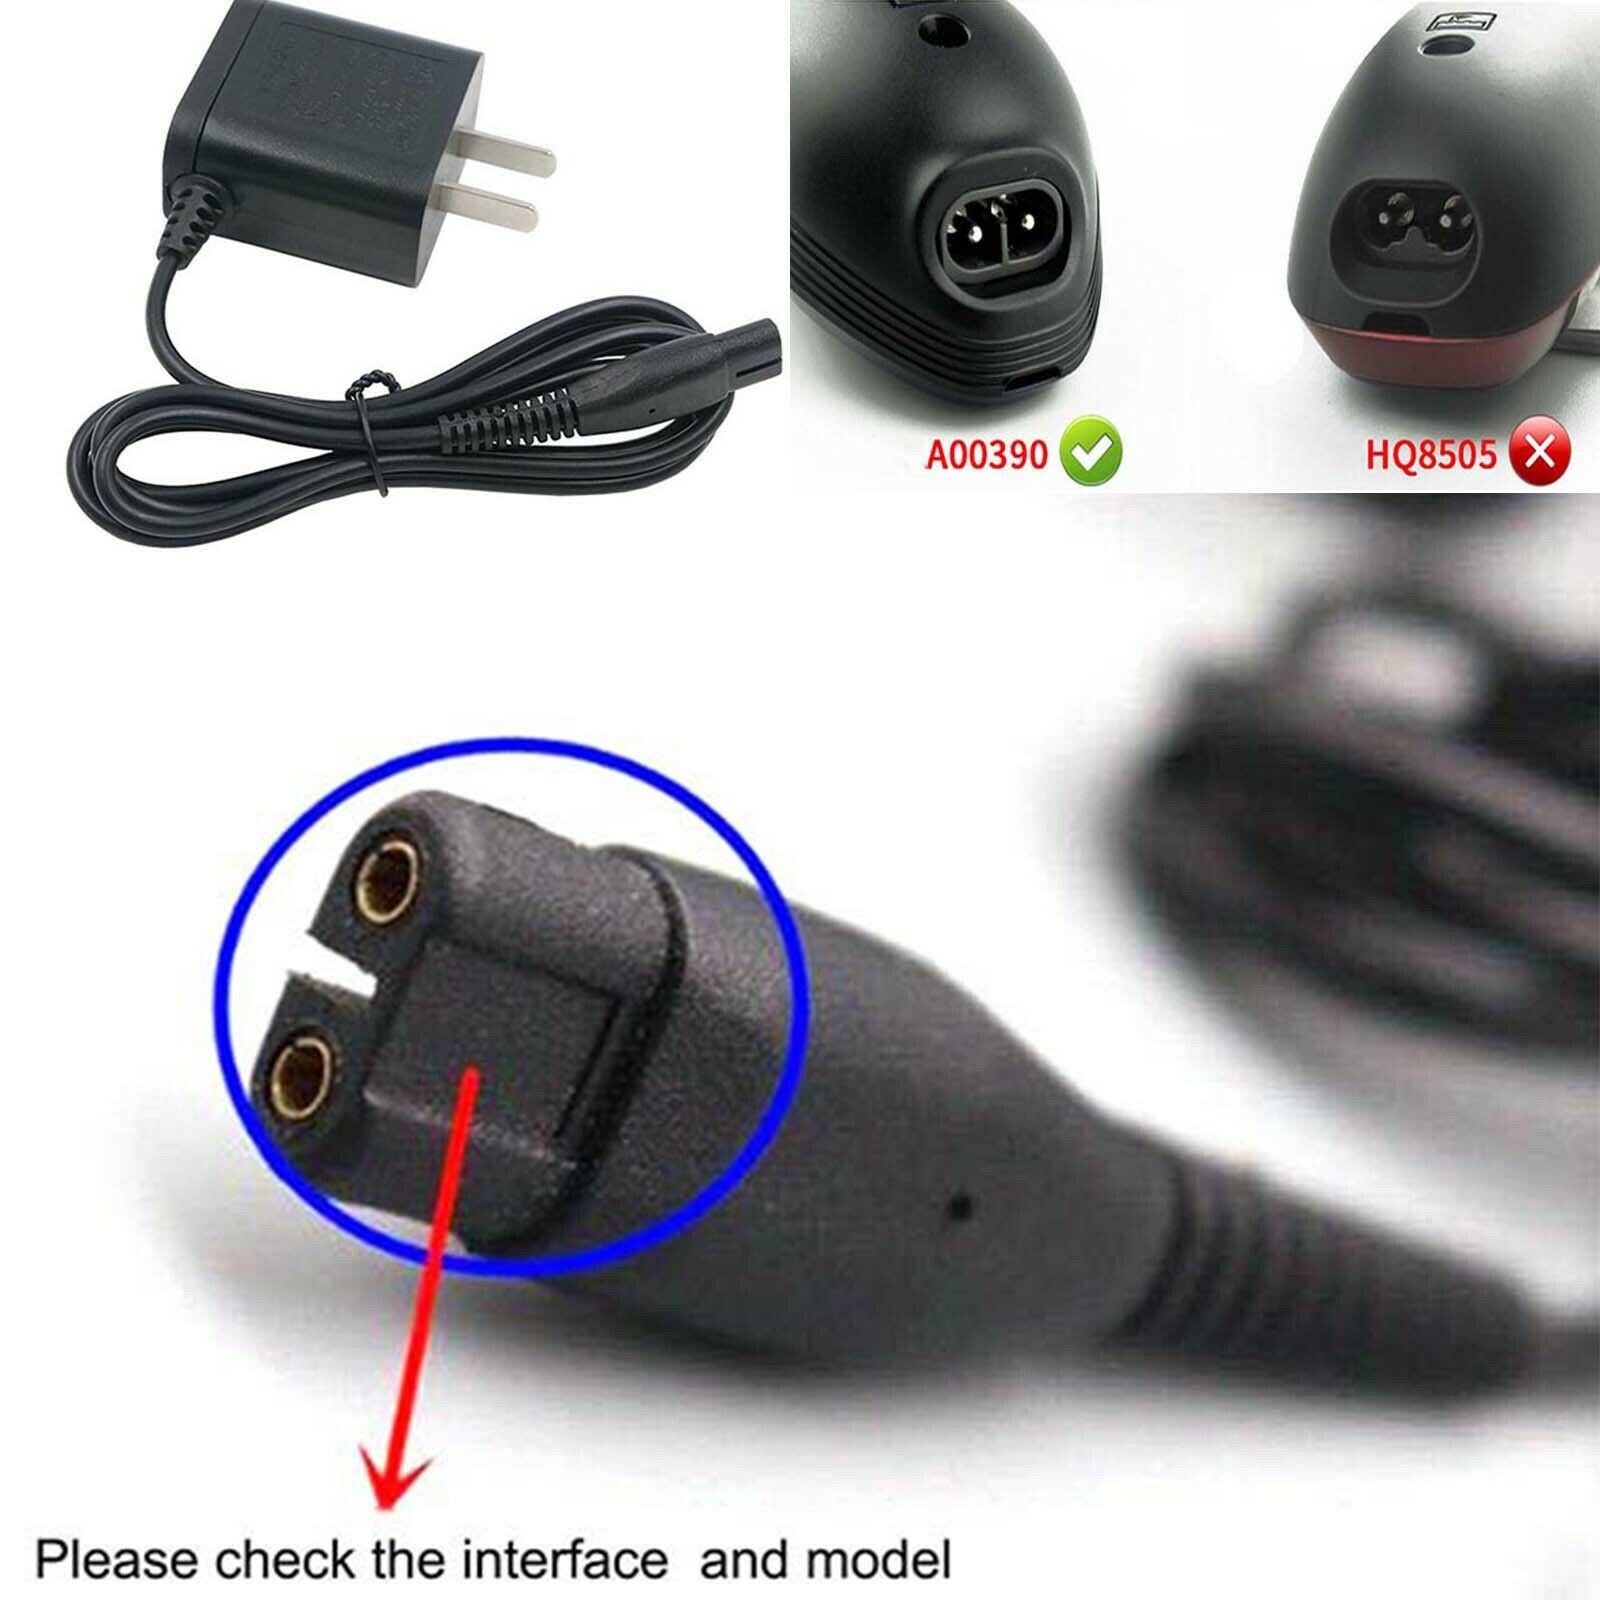 Charger Cable US Power Adapter Spare for QP2520 S528 S526 S529 Shaver SPD SPD Product Description Charger Cable US Powe